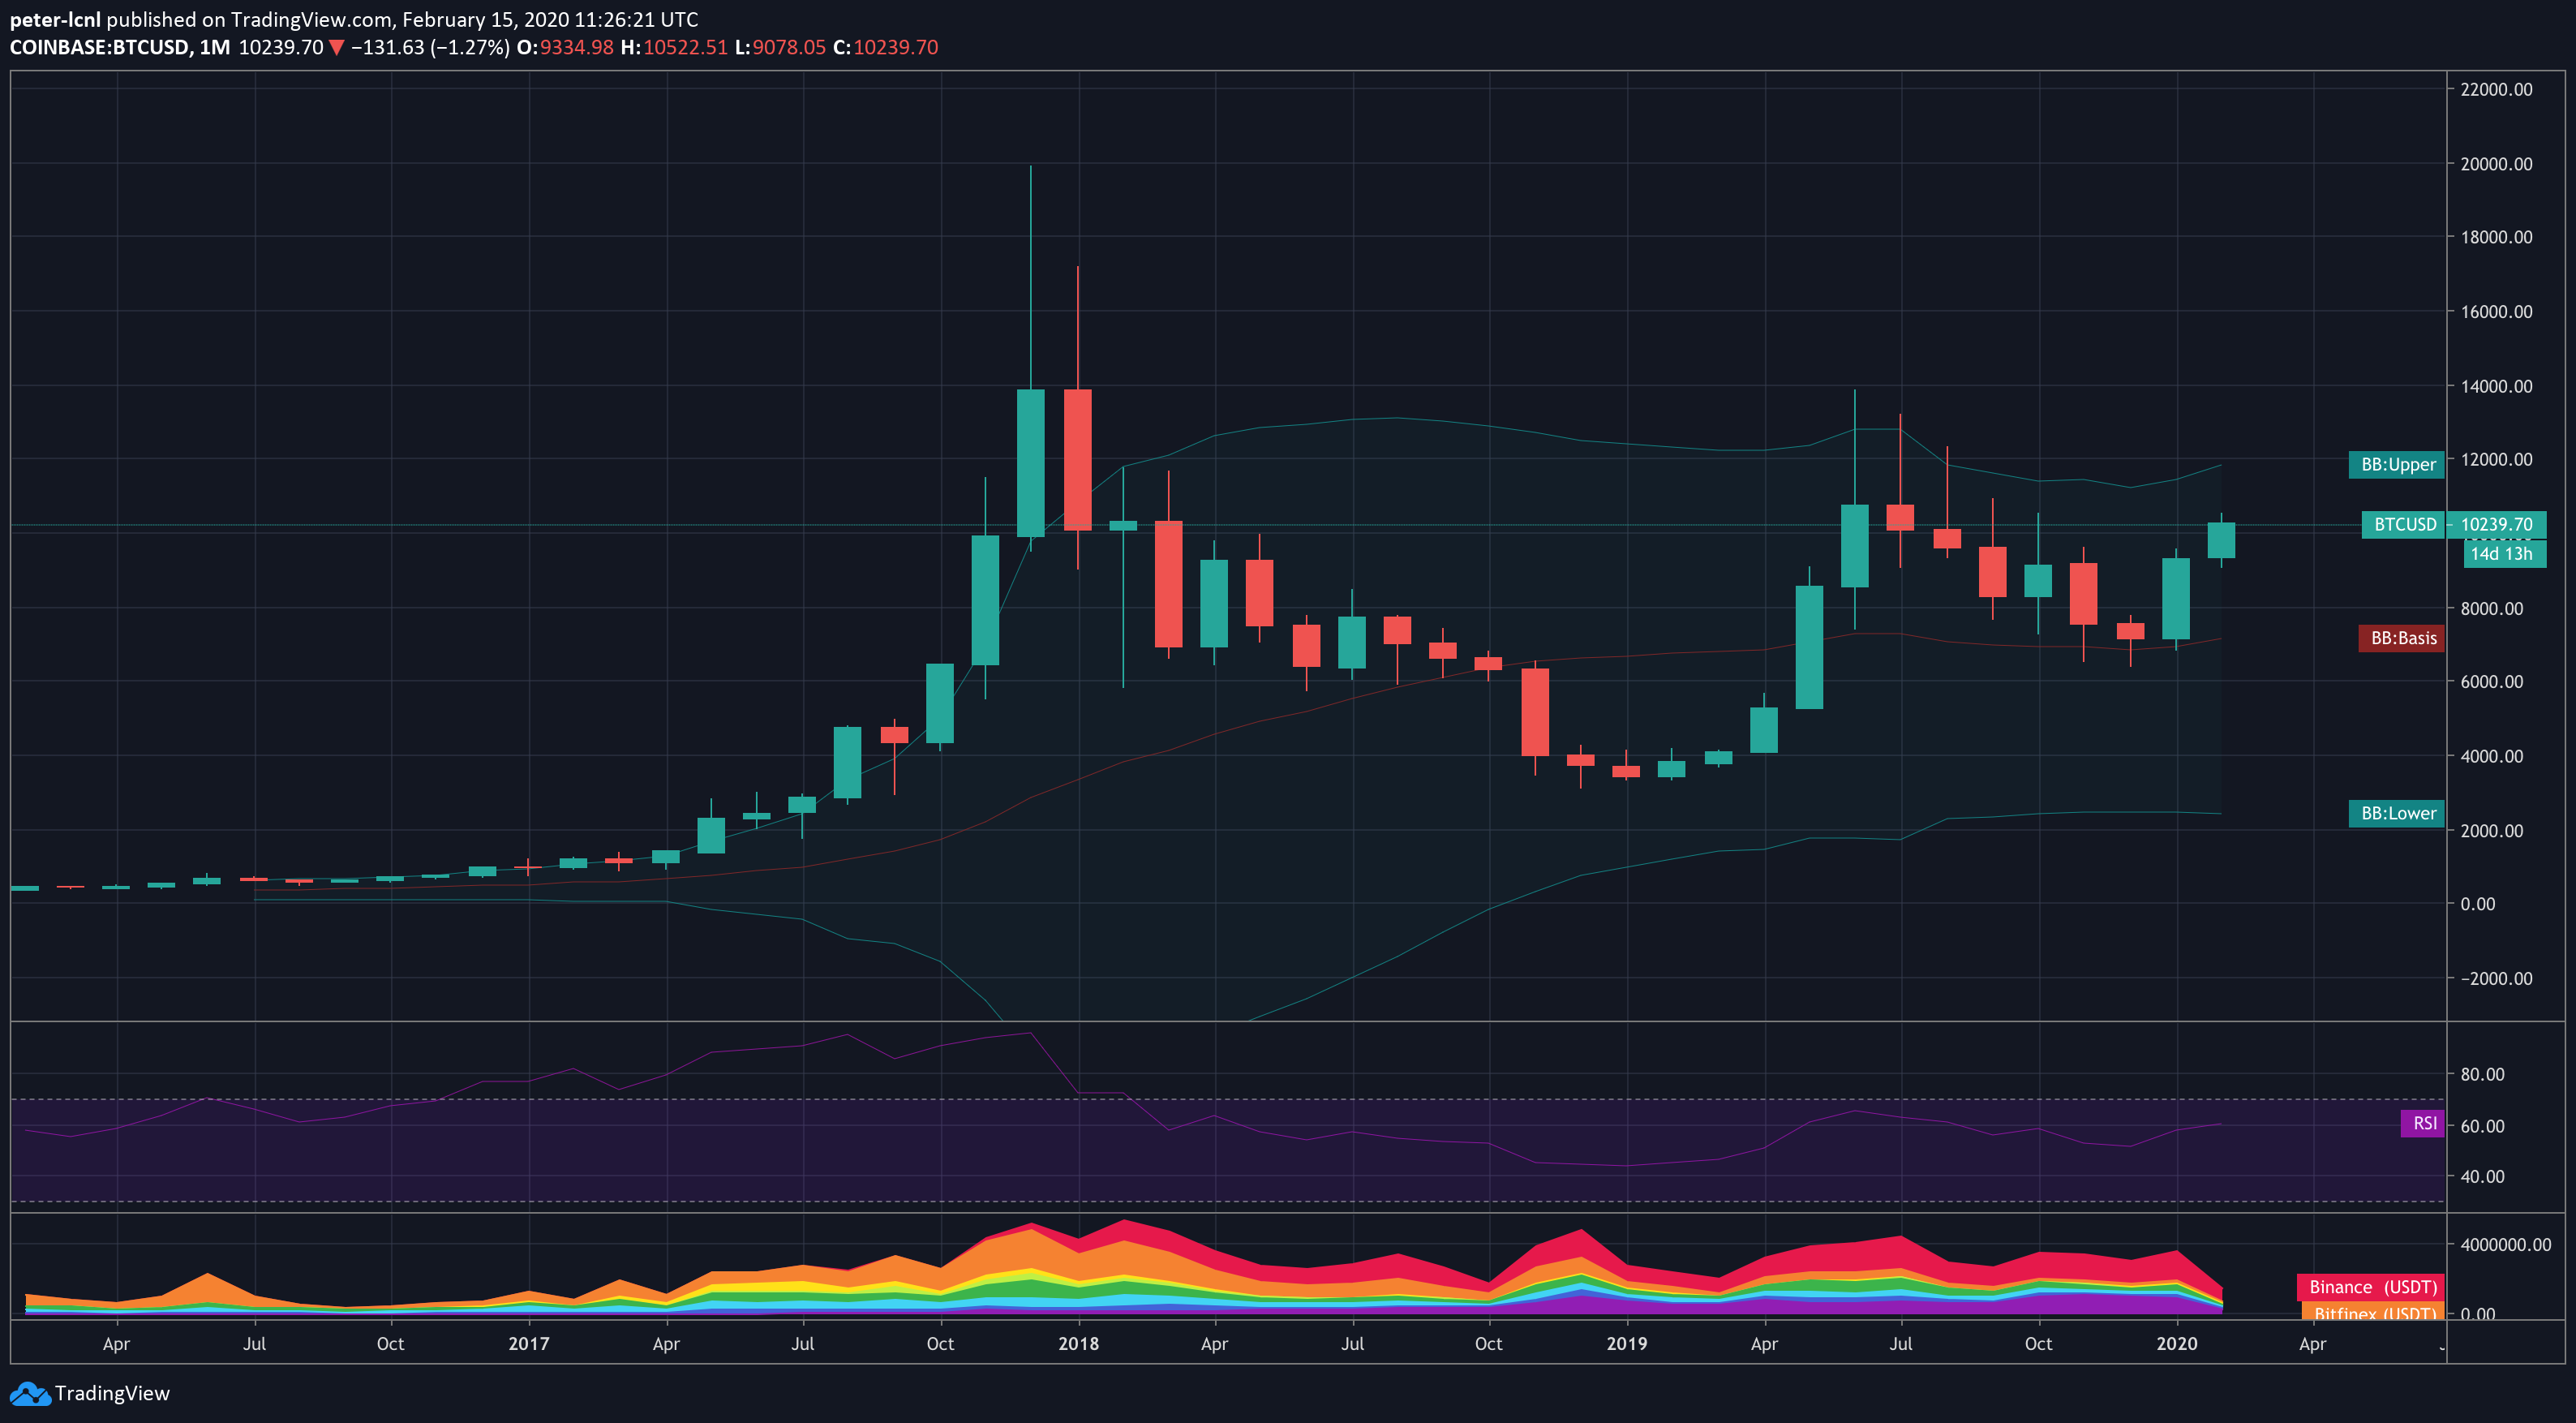 Bitcoin monthly open and closes (up to feb. 2020)